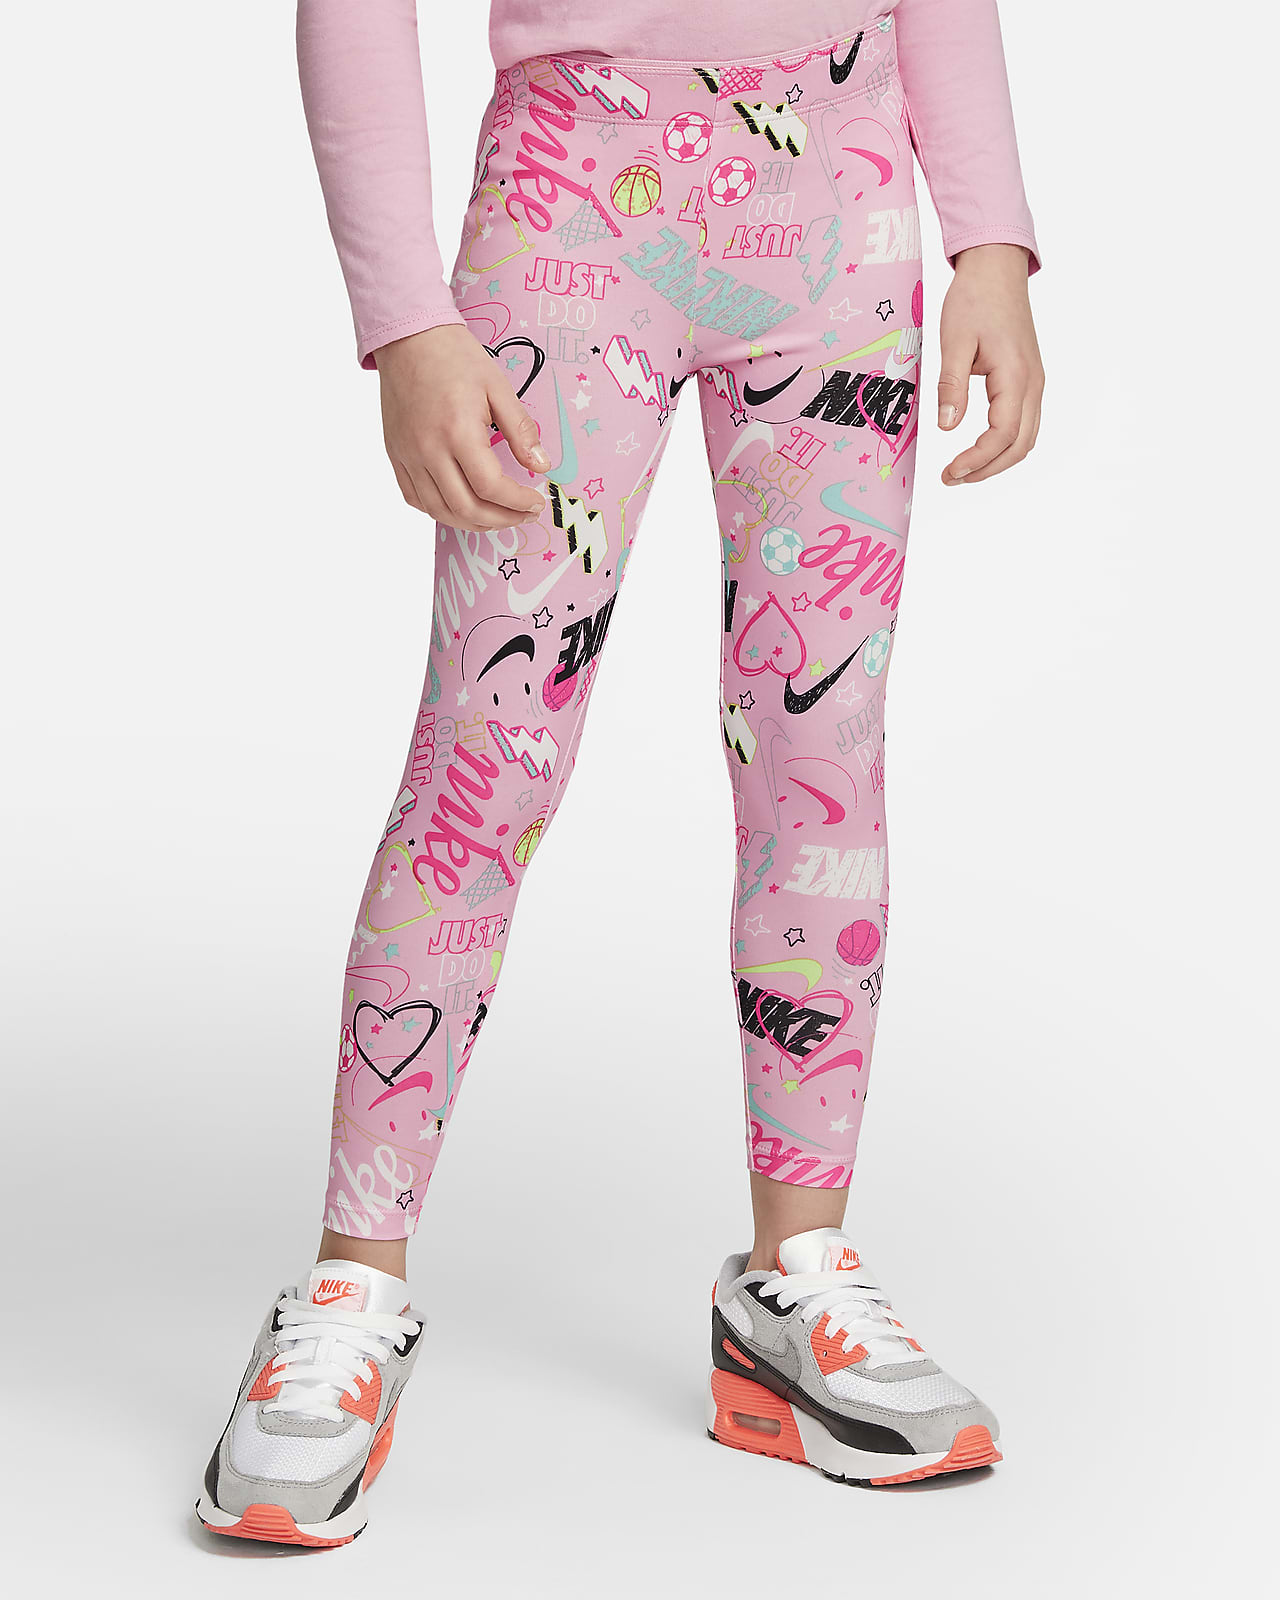 https://static.nike.com/a/images/t_PDP_1280_v1/f_auto,q_auto:eco/e1c66648-6170-43db-ad6c-d5b9c99fcfc4/little-kids-leggings-qvGQMW.png